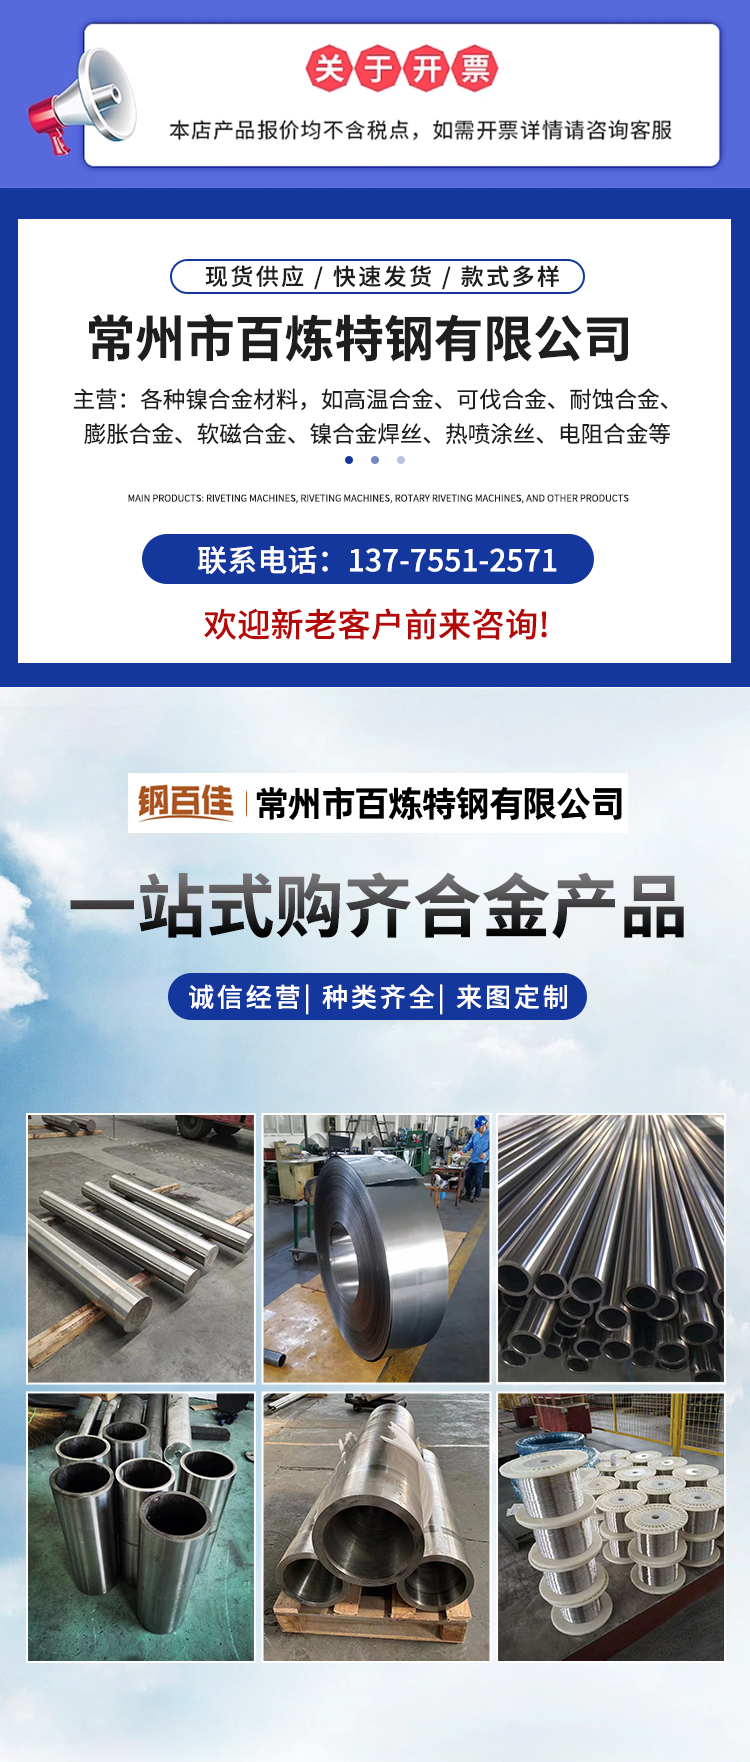 4J36 invar alloy steel is widely used in radio, precision instruments, instruments, and other industries